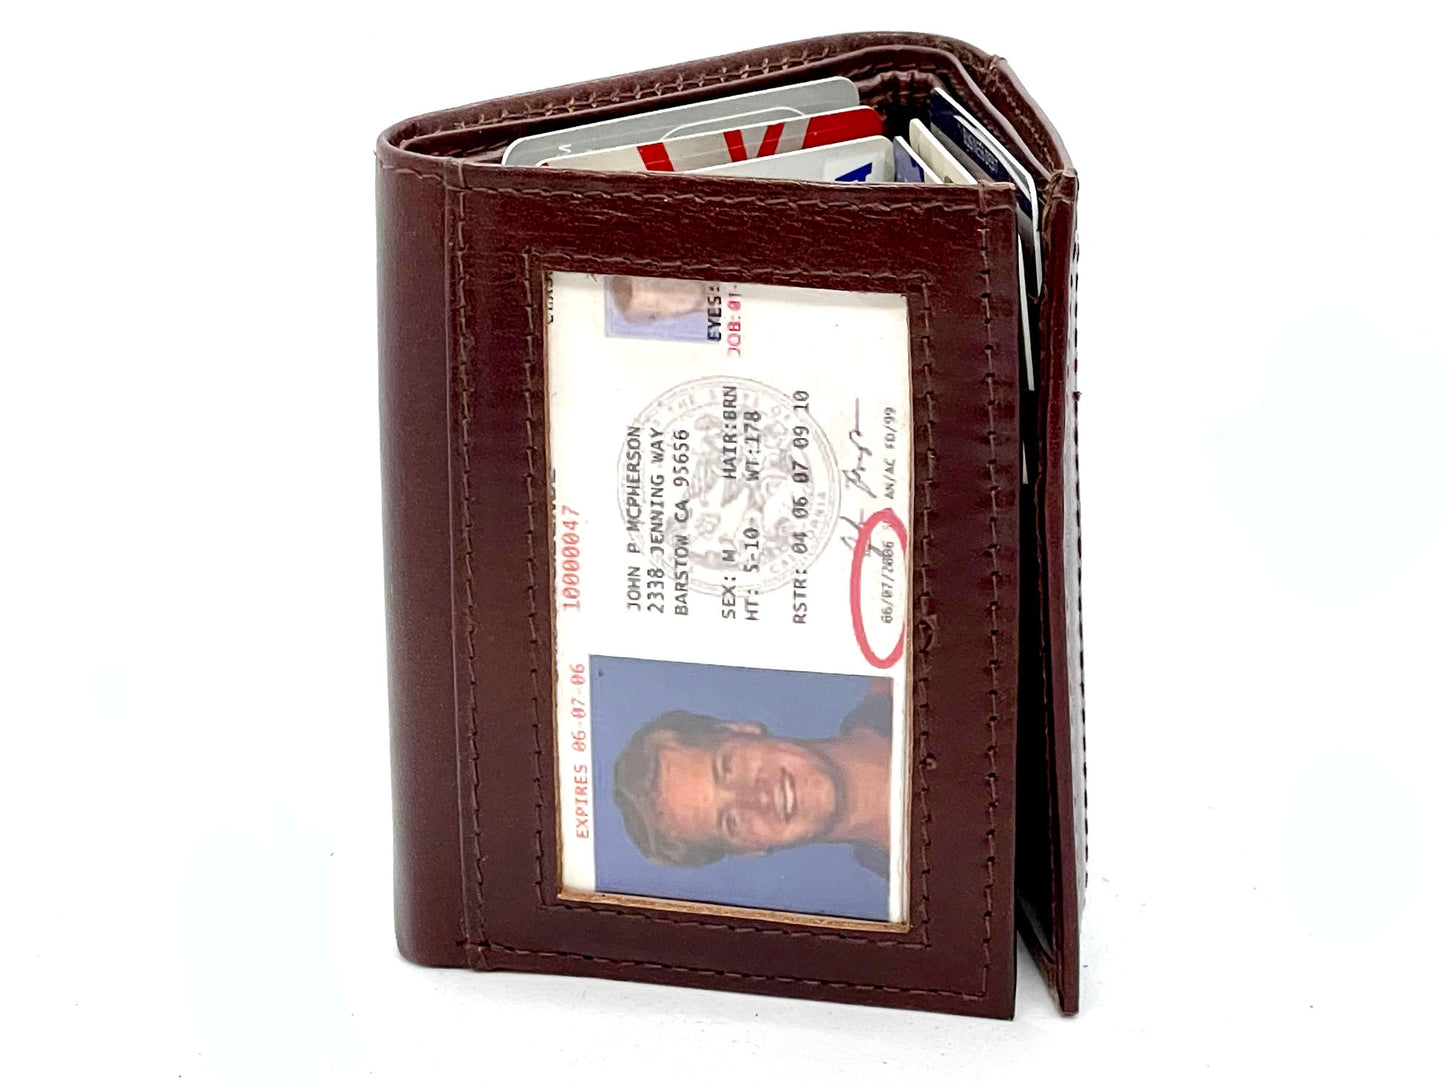 Brown Genuine Leather Men's Trifold Wallet Credit Card Holder Premium Quality